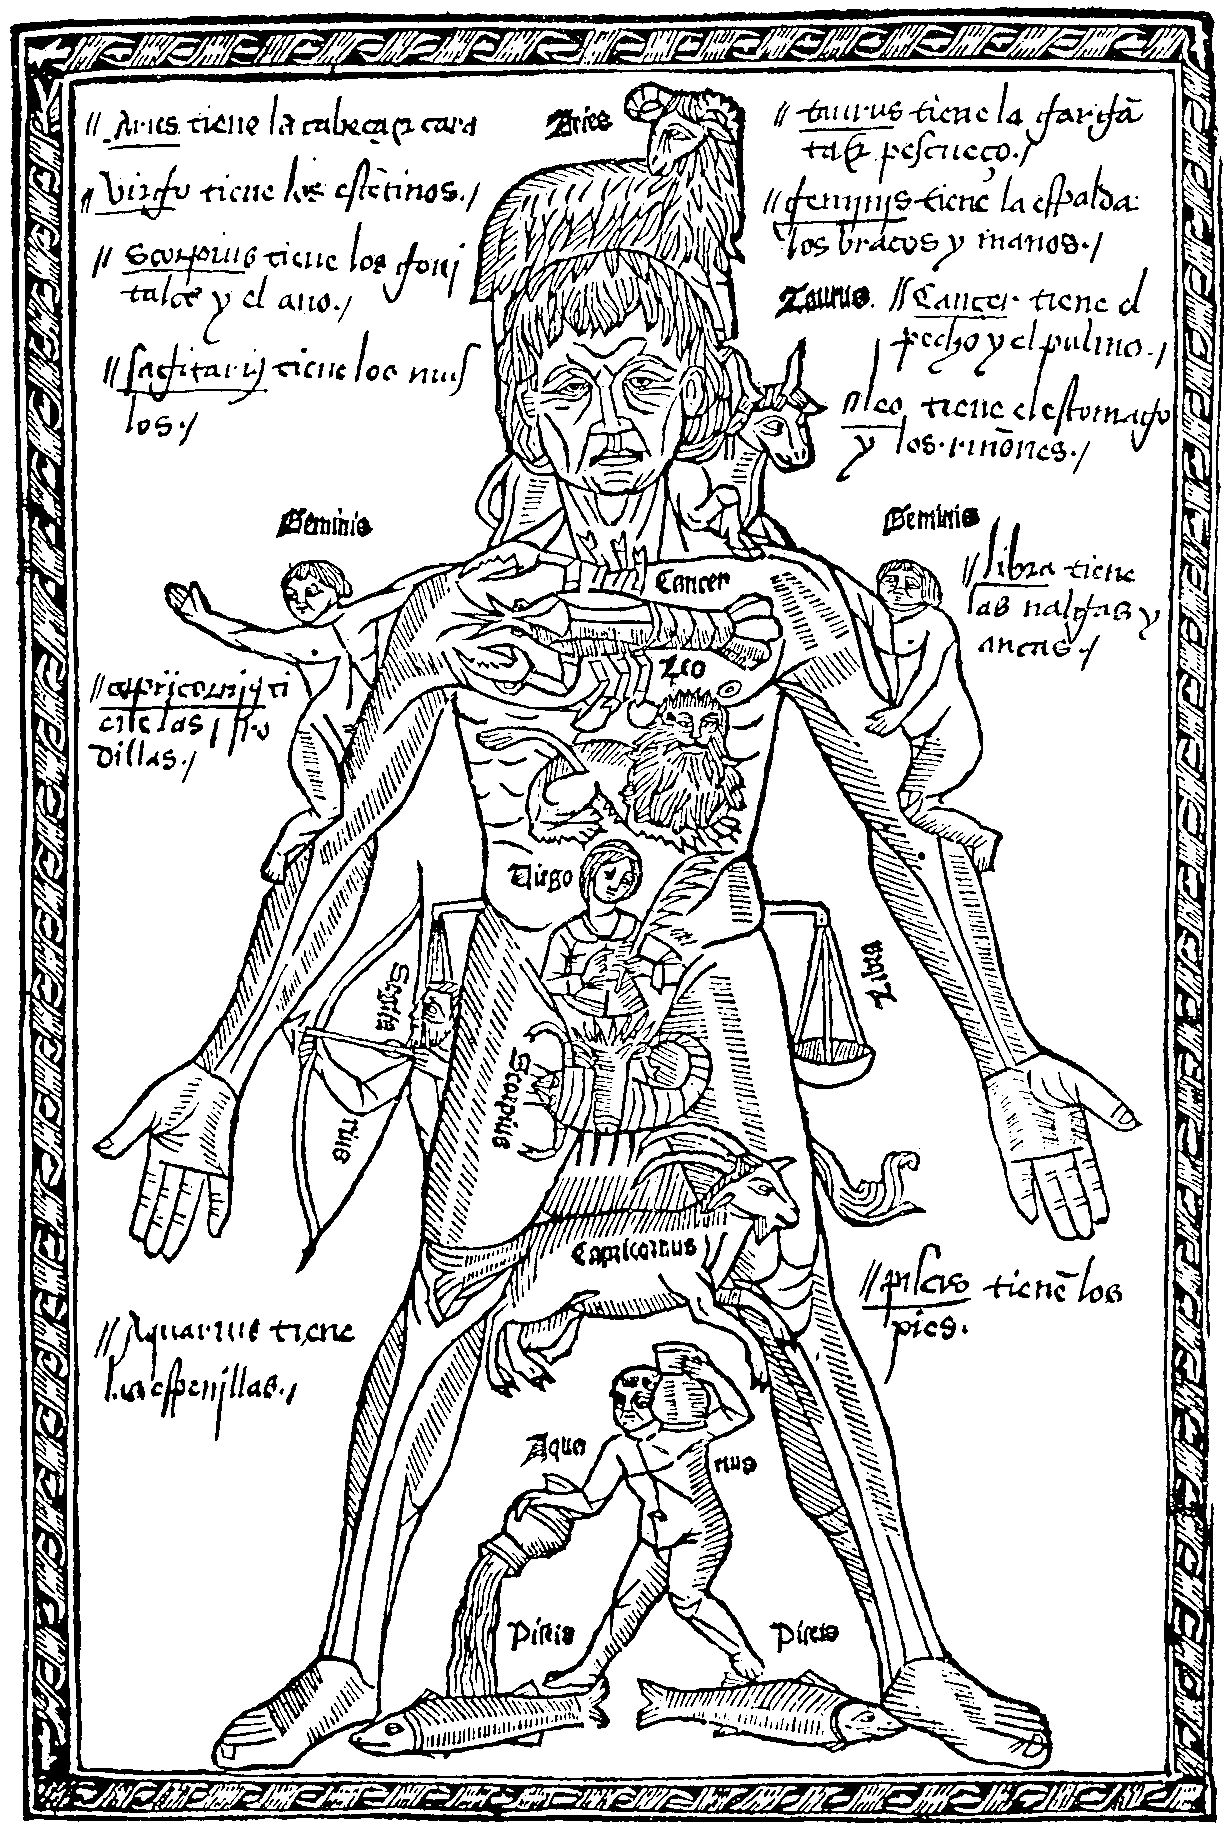 15th-century print of a wounded man with zodiac